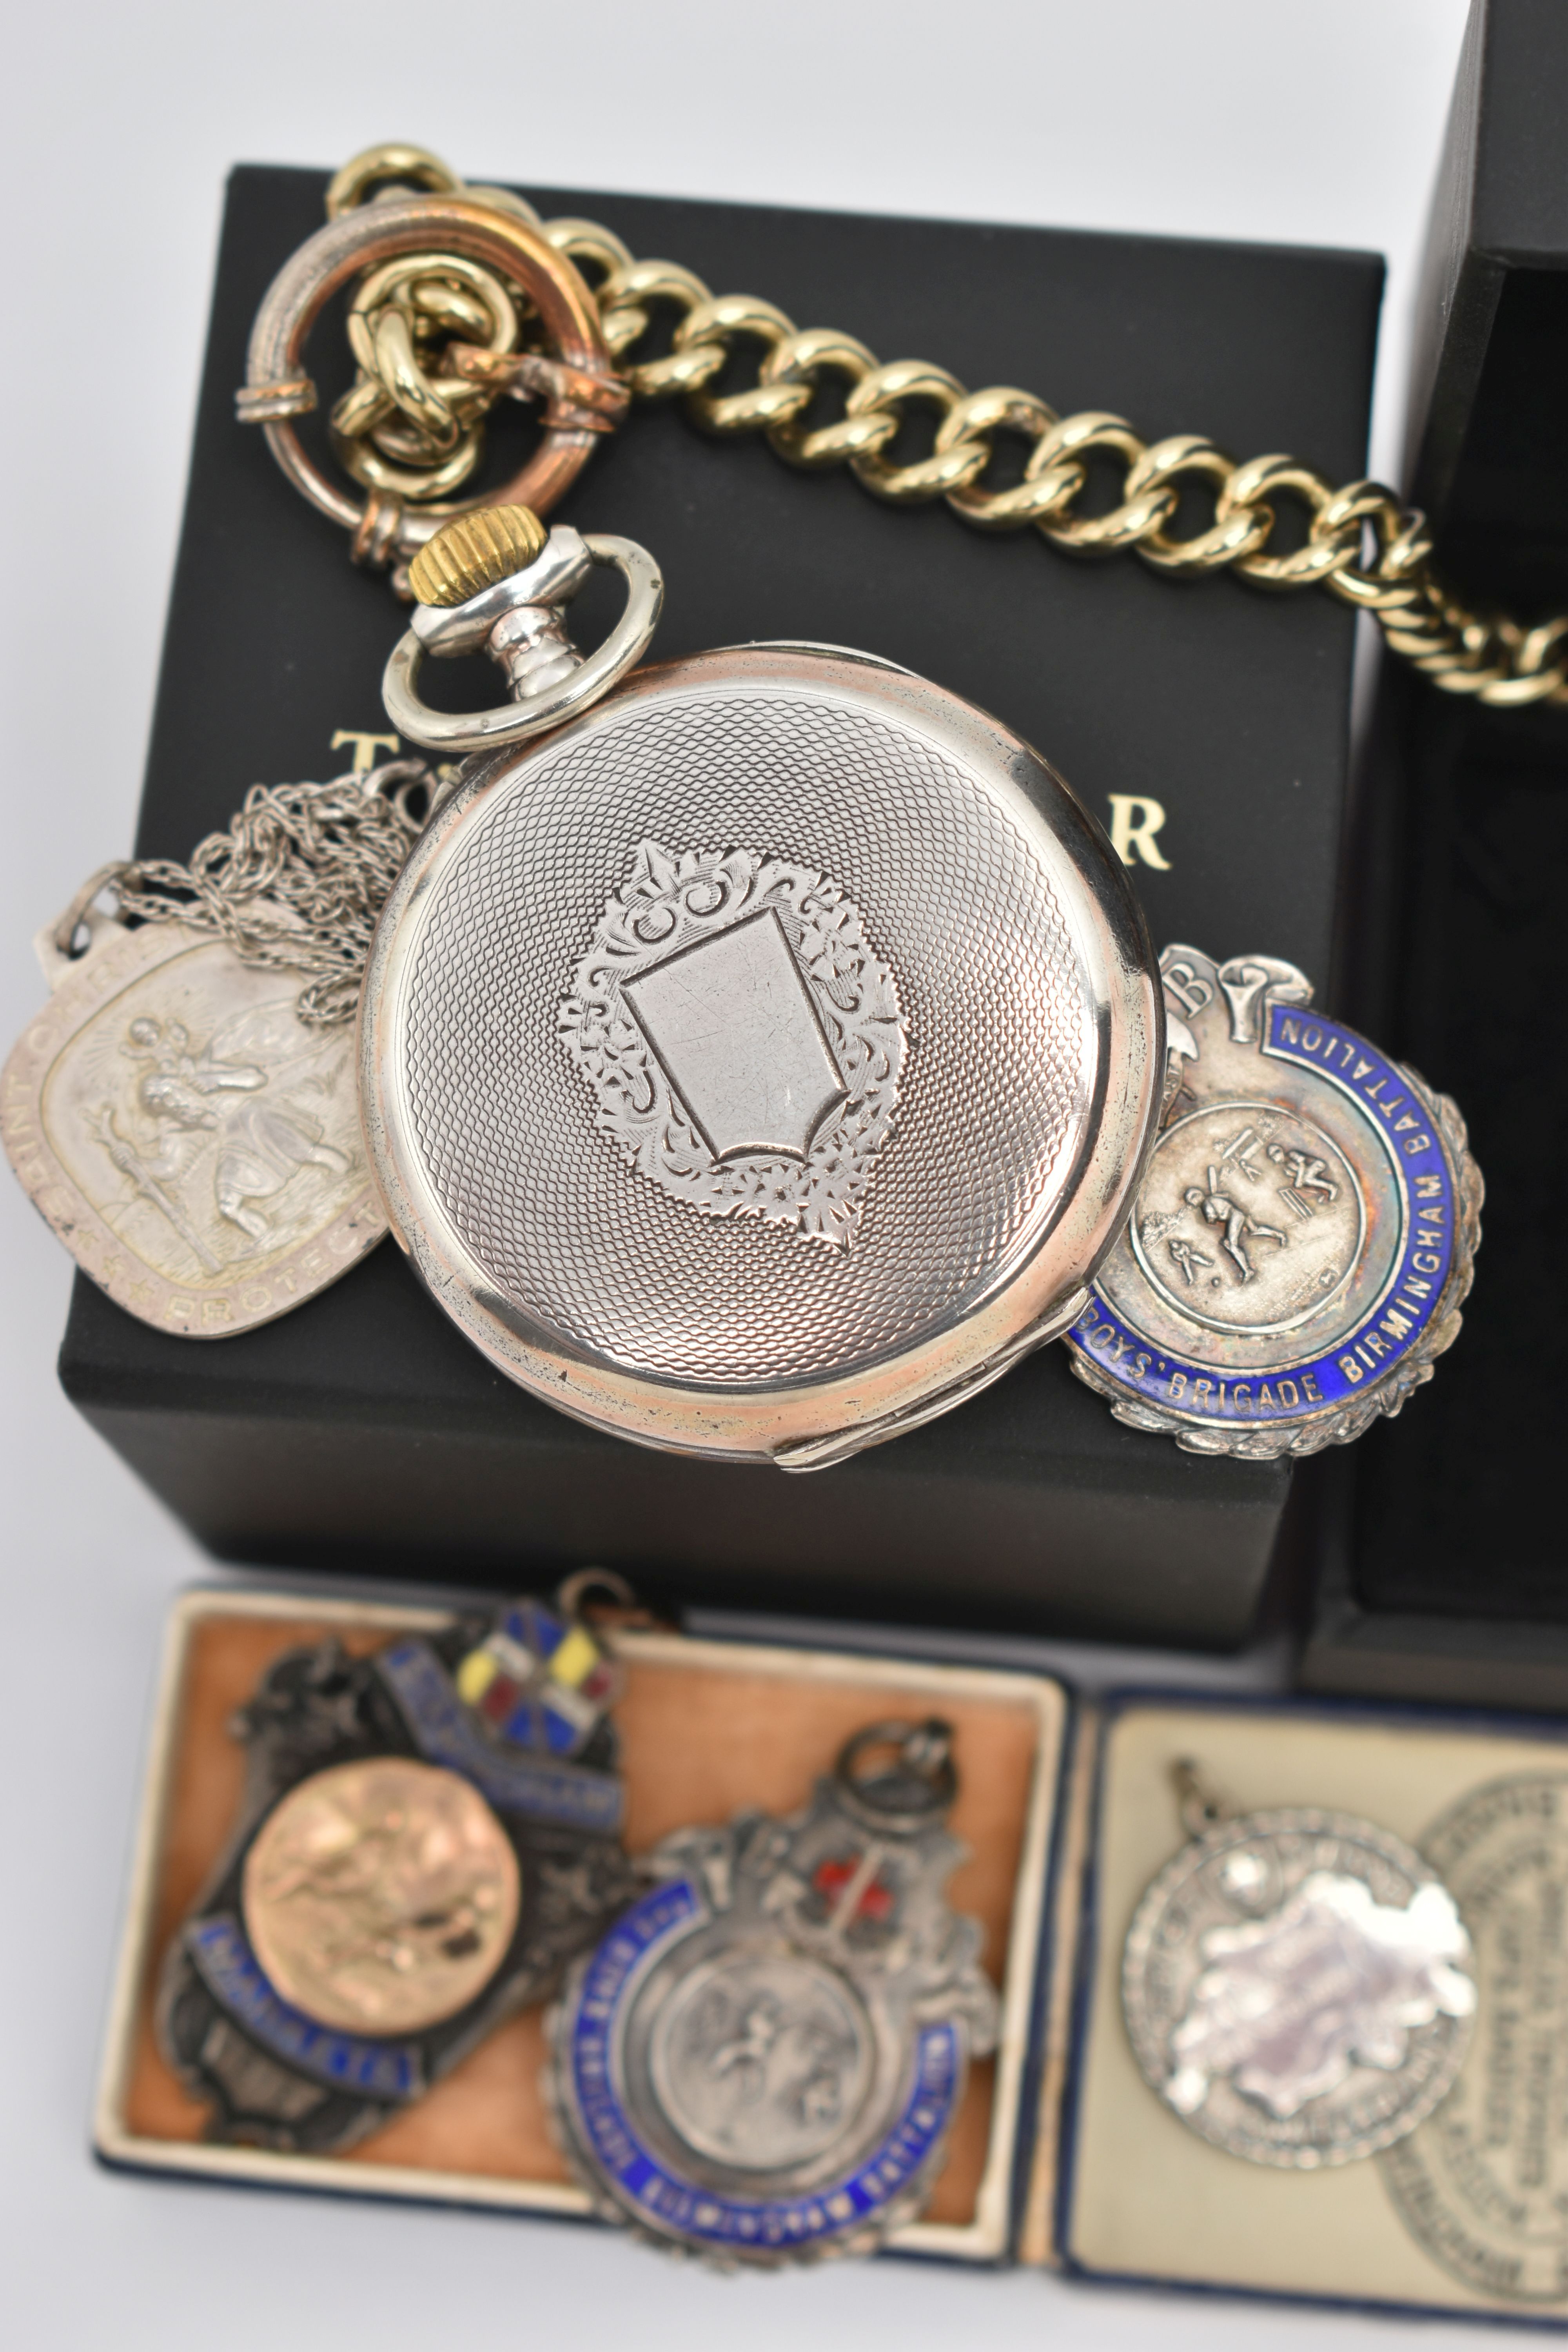 AN OPEN FACE POCKET WATCH AND ASSORTED MEDALS, hand wound movement, round white dial, Arabic - Image 6 of 9